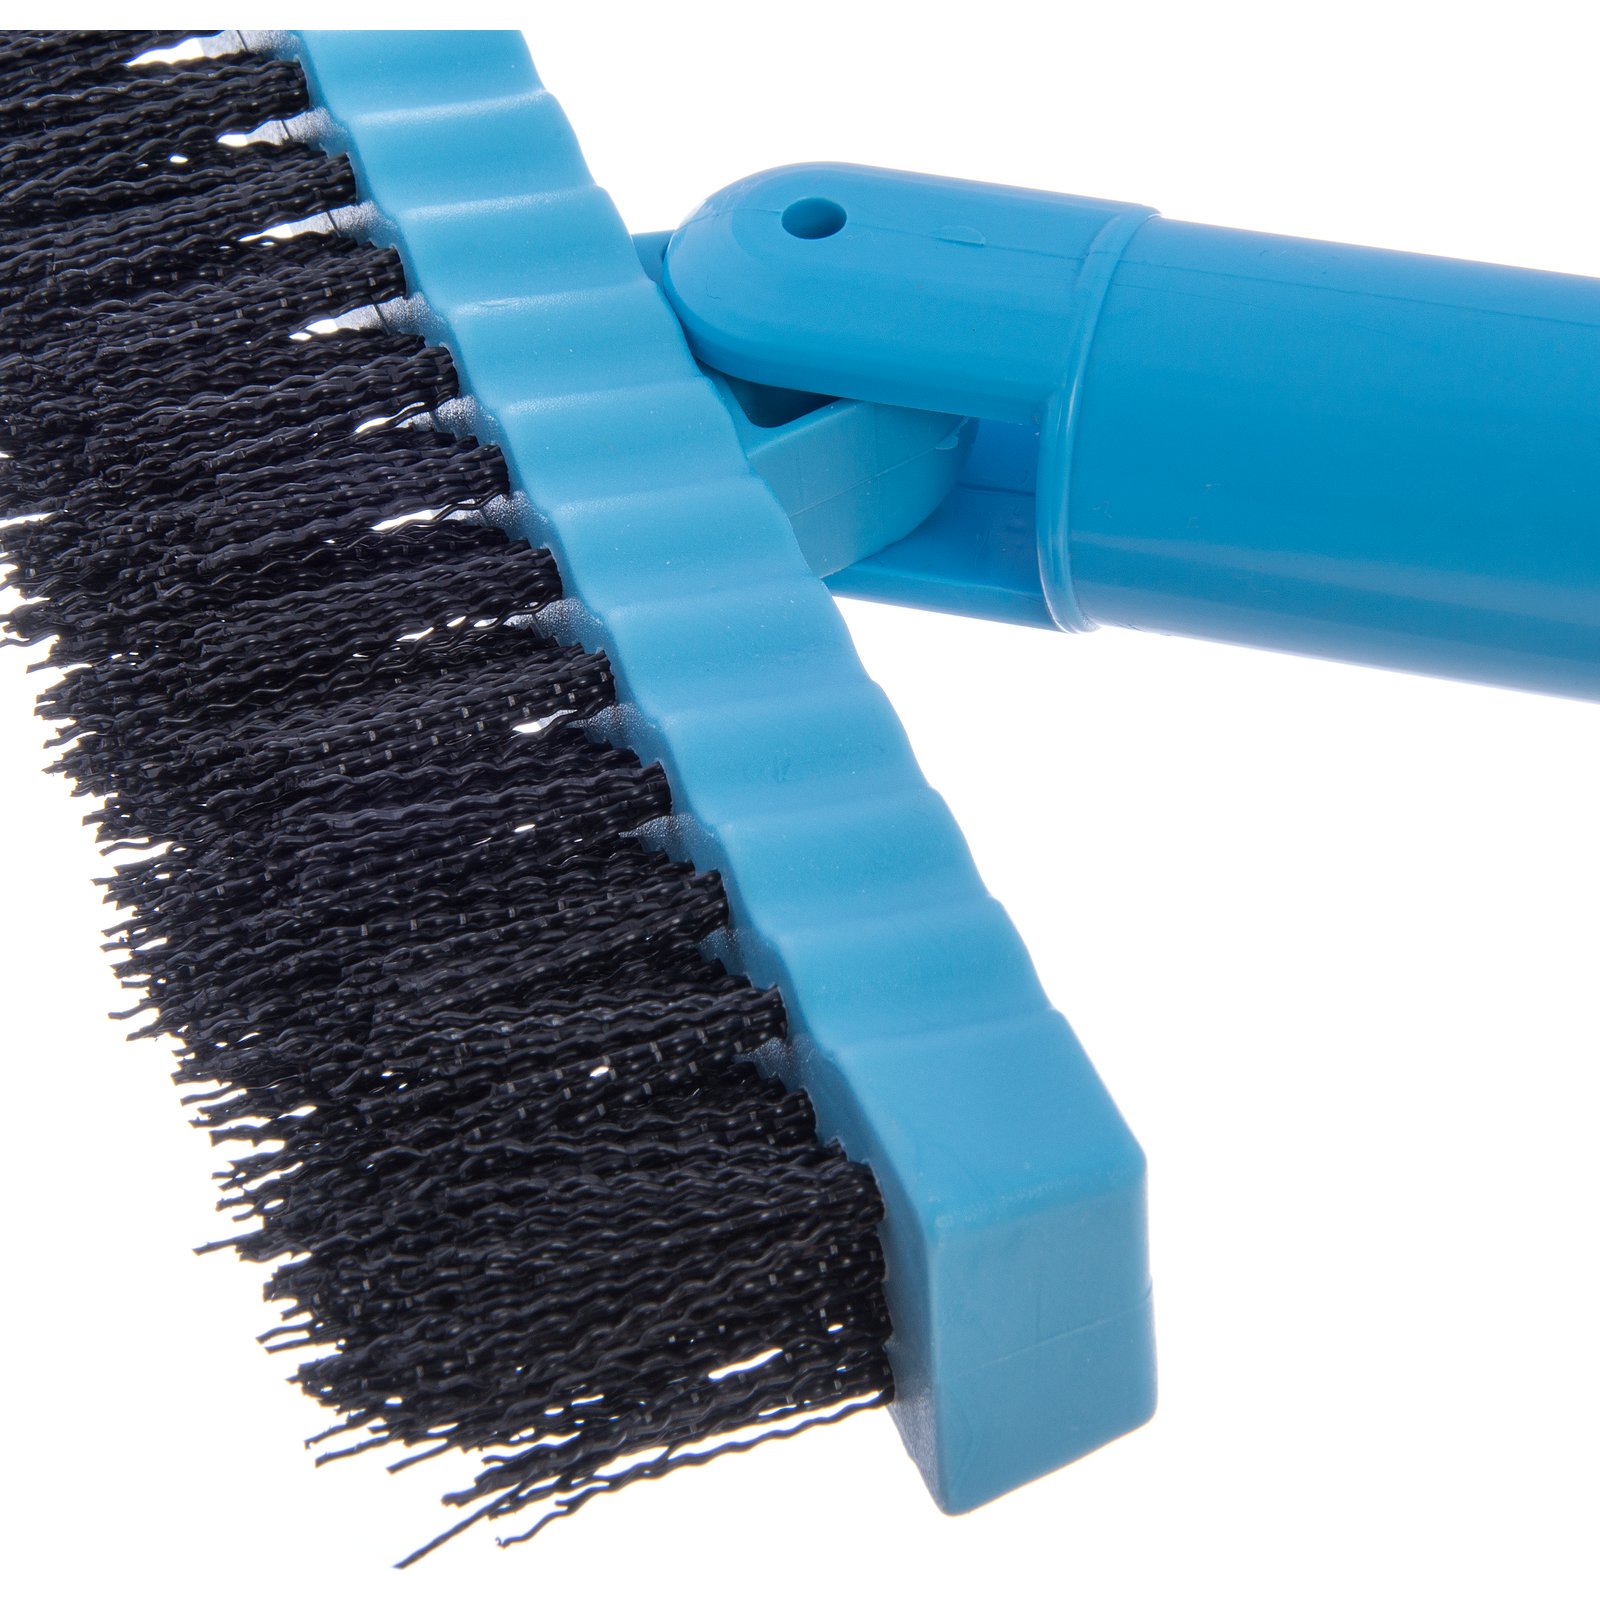 Tile and Grout Brush with Acme Threading, Item #224